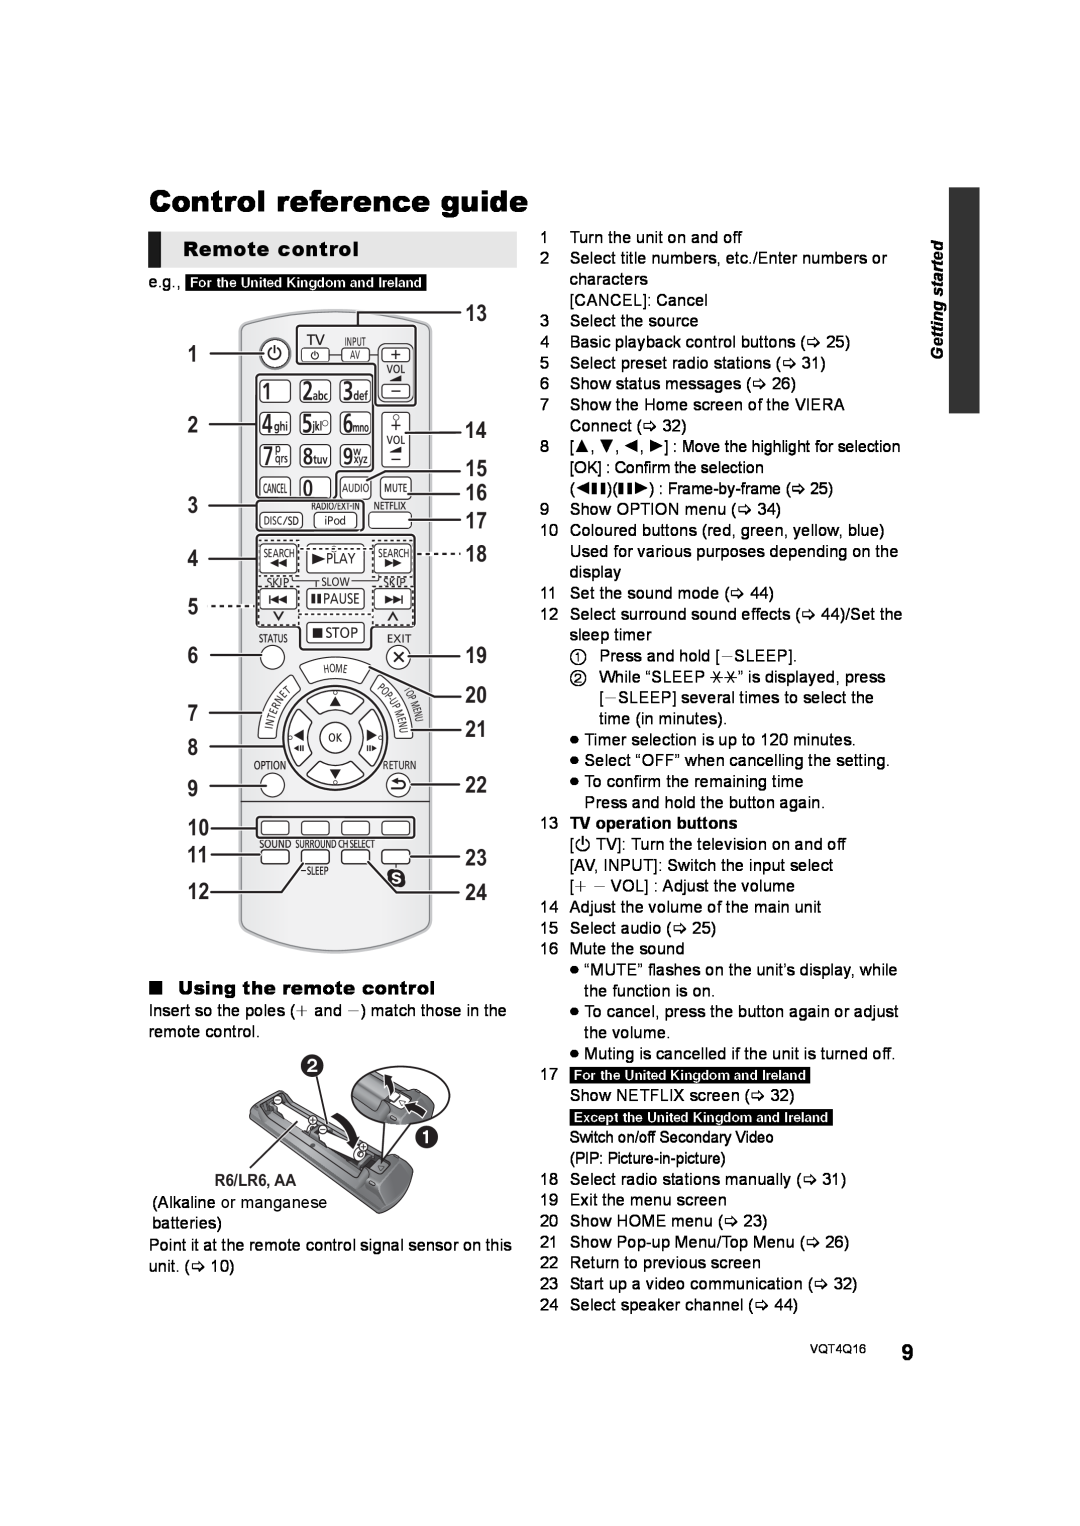 Panasonic SC-BTT560 SC-BTT500 SC-BTT460 SC-BTT400 manual Control reference guide 